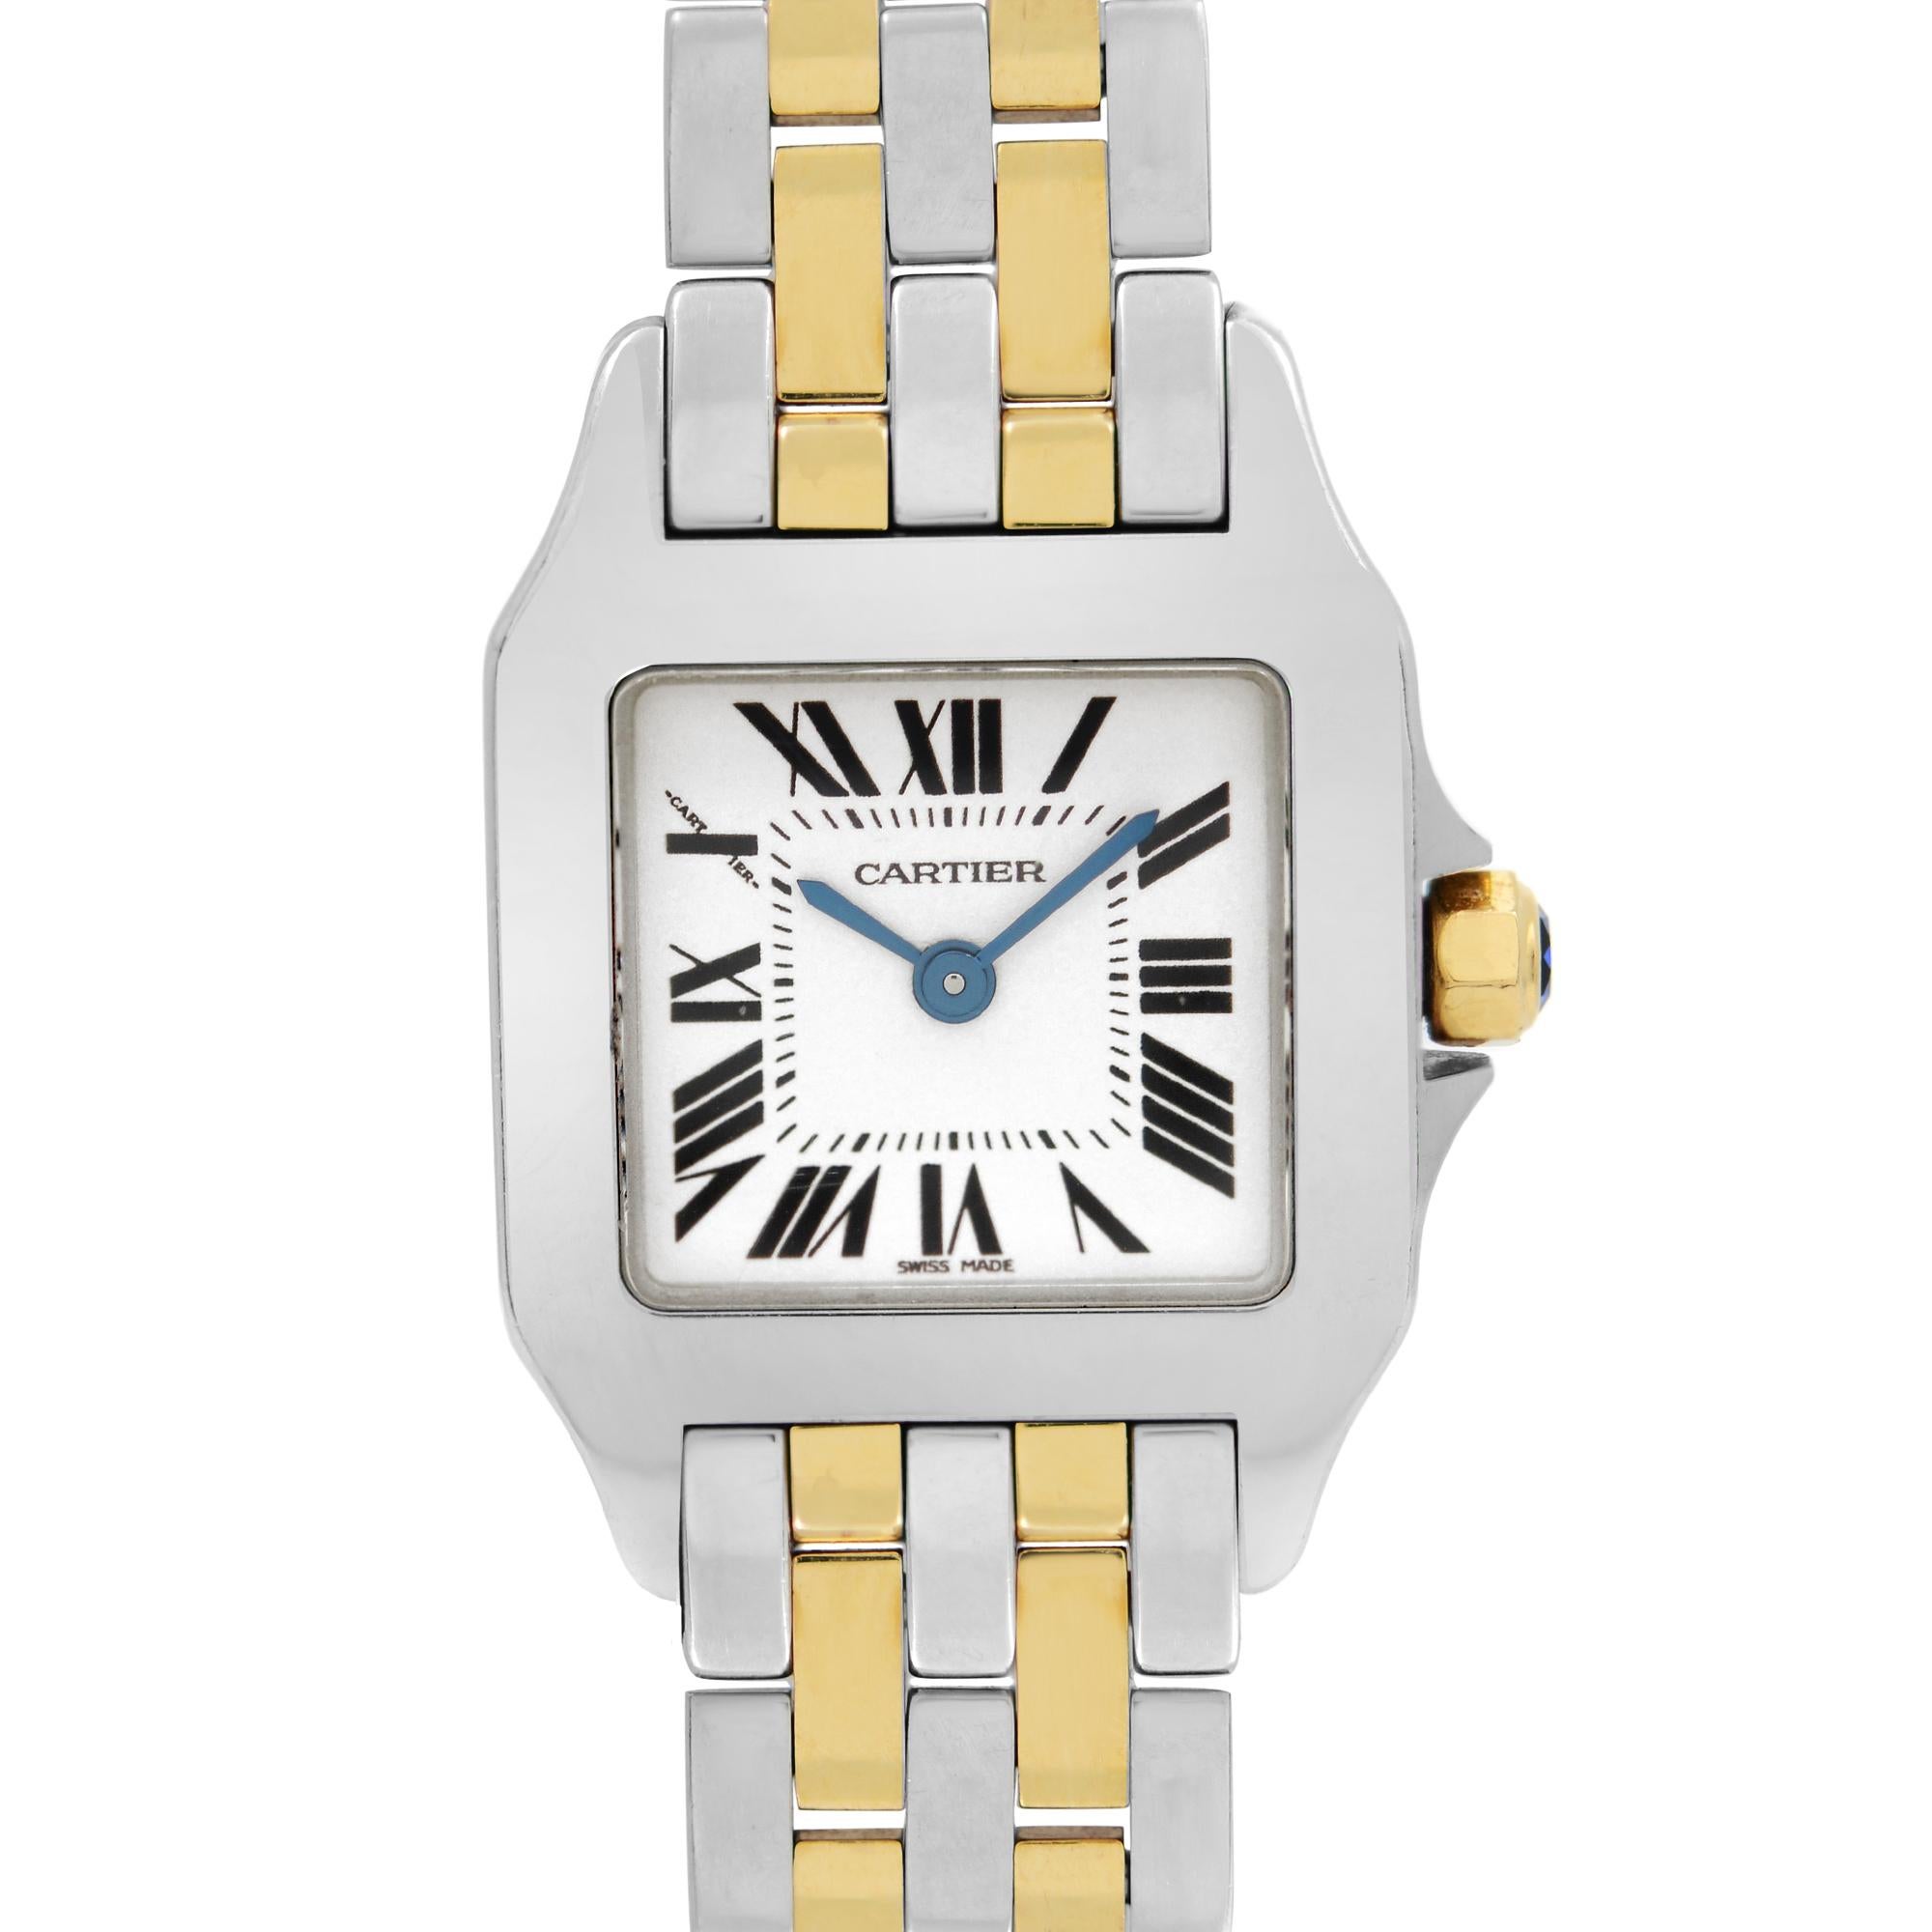 Pre-owned Cartier Santos Demoiselle 18k Gold Steel White Dial Quartz Ladies Watch W25066Z6. This Beautiful Timepiece is Powered by Quartz (Battery) Movement And Features: Stainless Steel Case with a 18k Gold & Stainless Steel Bracelet, Fixed